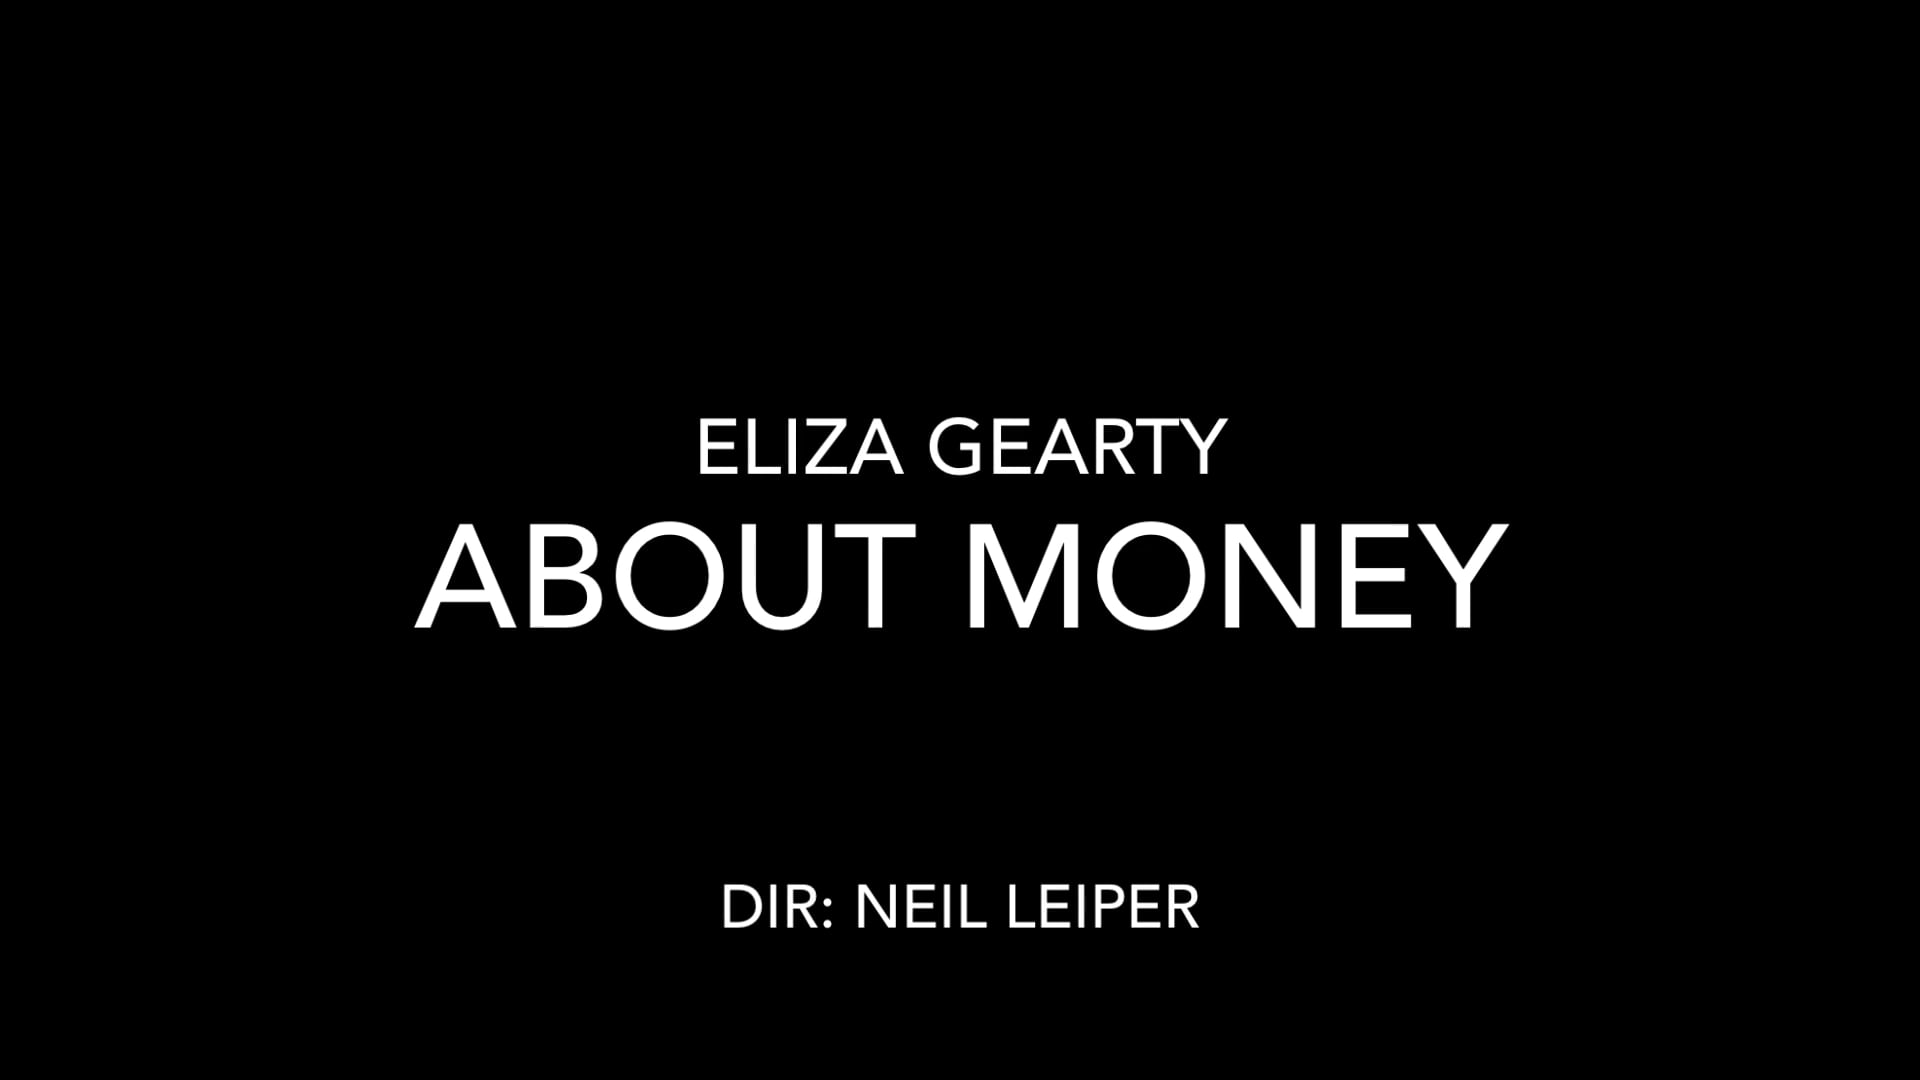 Michael McCardie - About Money on Vimeo